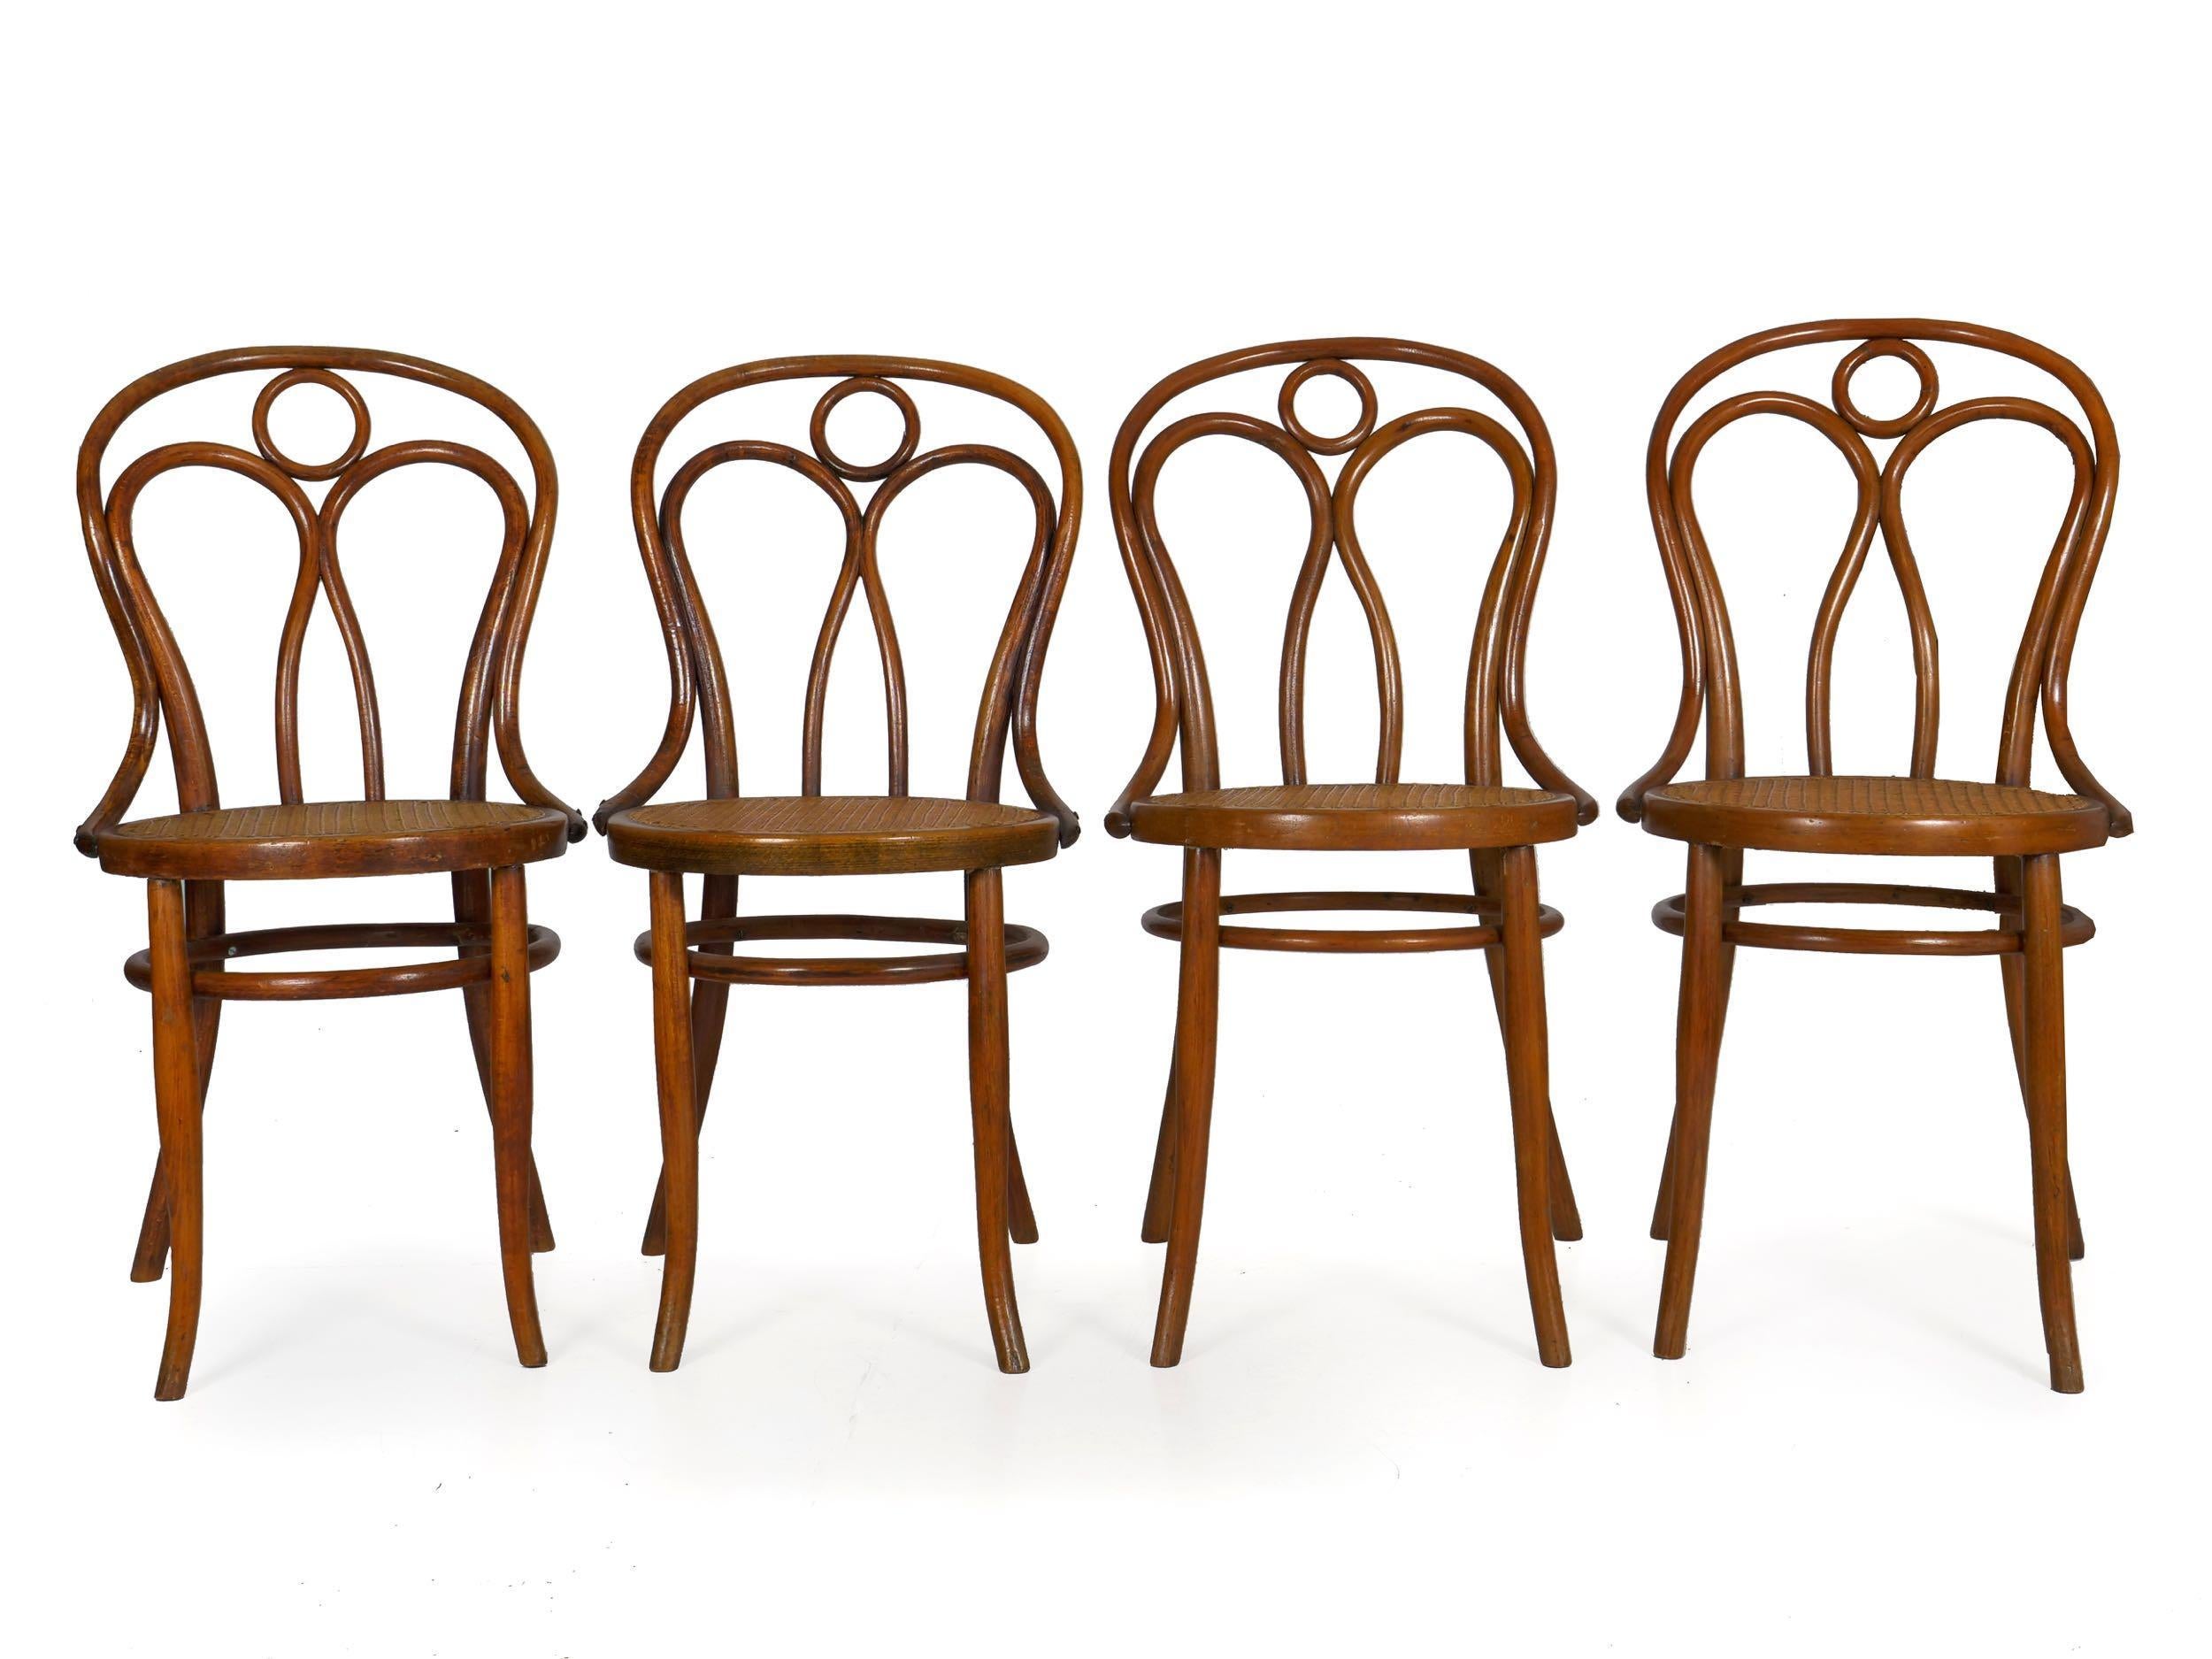 A fine set of late 19th century dining chairs designed by Josef Kohn and manufactured by his firm, one still retaining the original label remnants, this is offered as no. 36 in his catalogue and is a quite rare form with the little circle in the